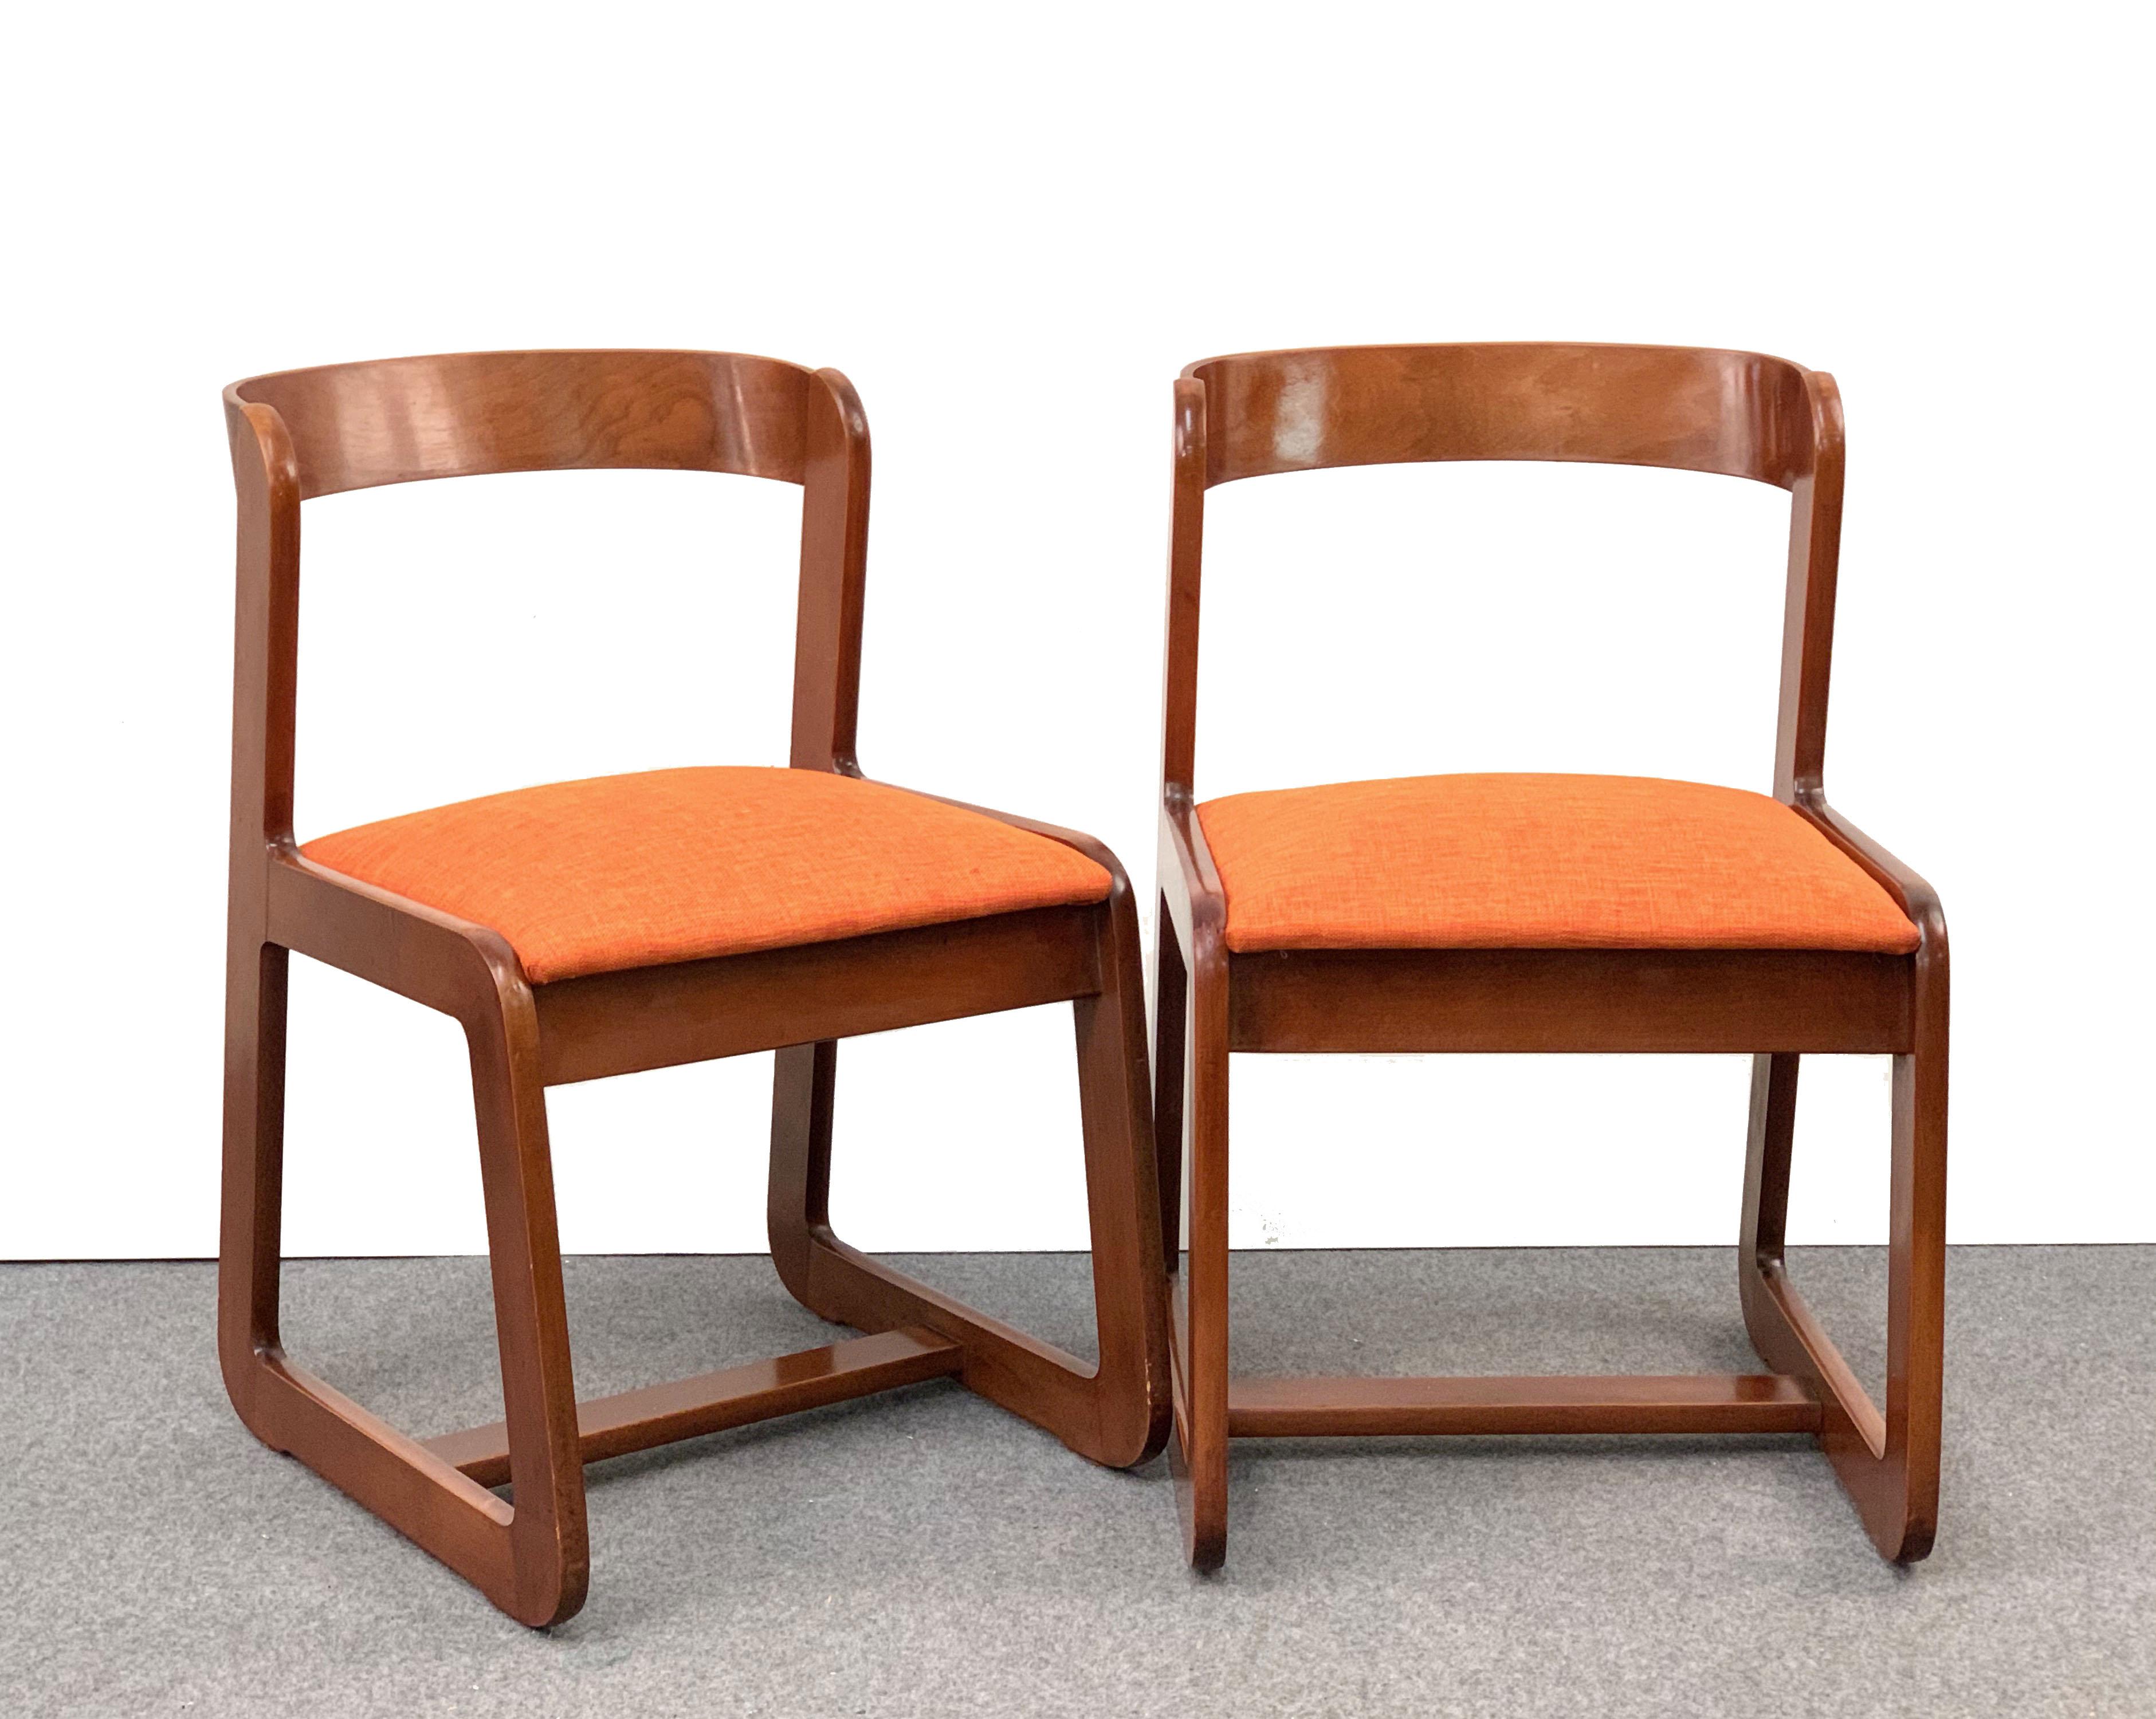 Beautiful set of six midcentury wooden chairs designed by Willy Rizzo for Mario Sabot.

This marvelous set was produced in the 1970s in Italy. The curved wood back has a sinuous line. The upholstery has been replaced and is new, it is a very nice